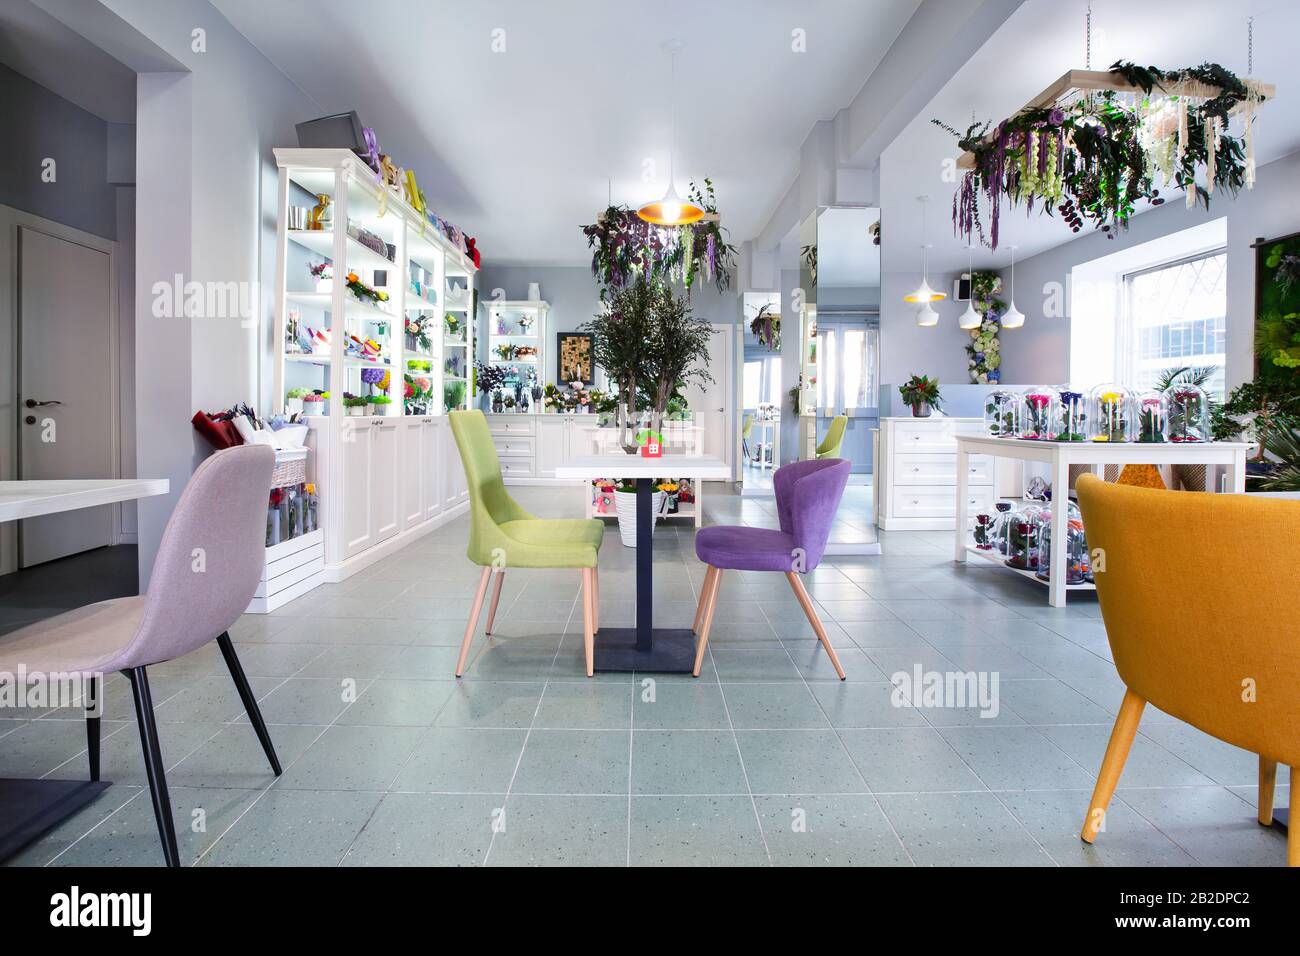 Flower conceptual interior cafe. Beautiful Eco style Stock Photo